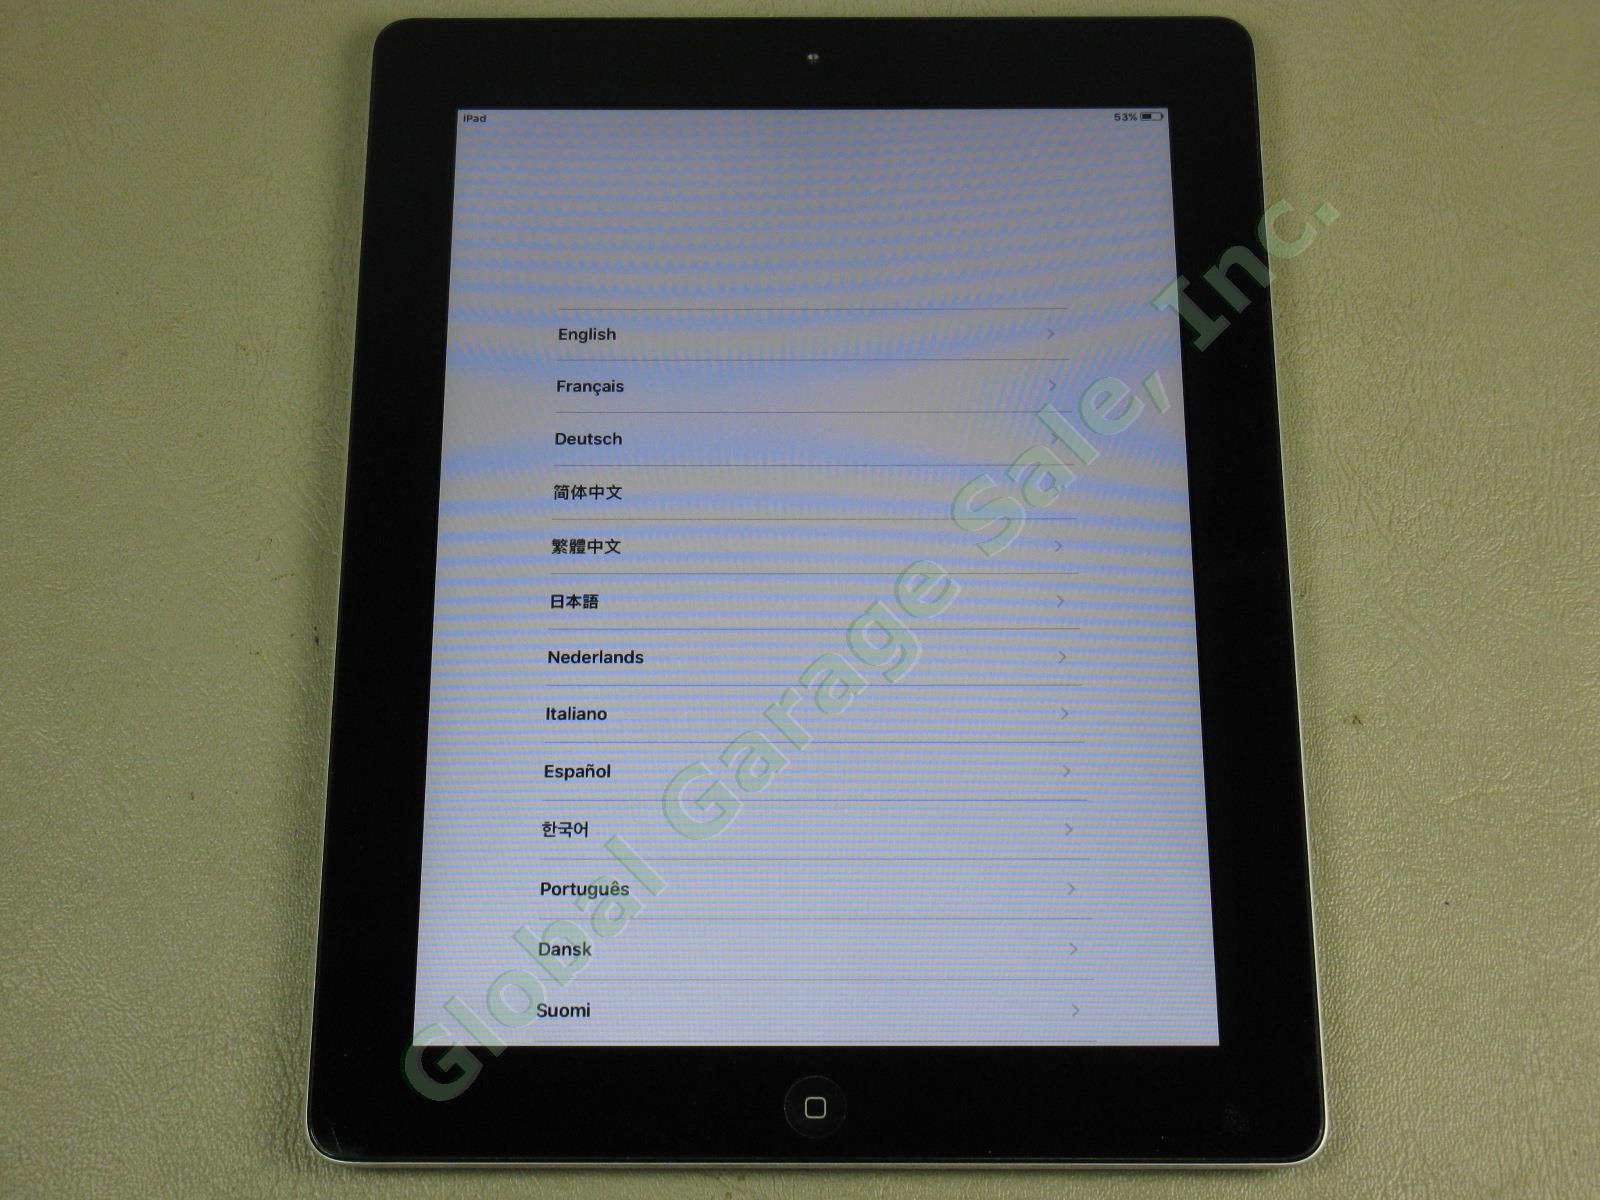 Apple iPad 2 Black Tablet Wifi 16GB Works Great One Owner MC770LL/A A1395 NO RES 1